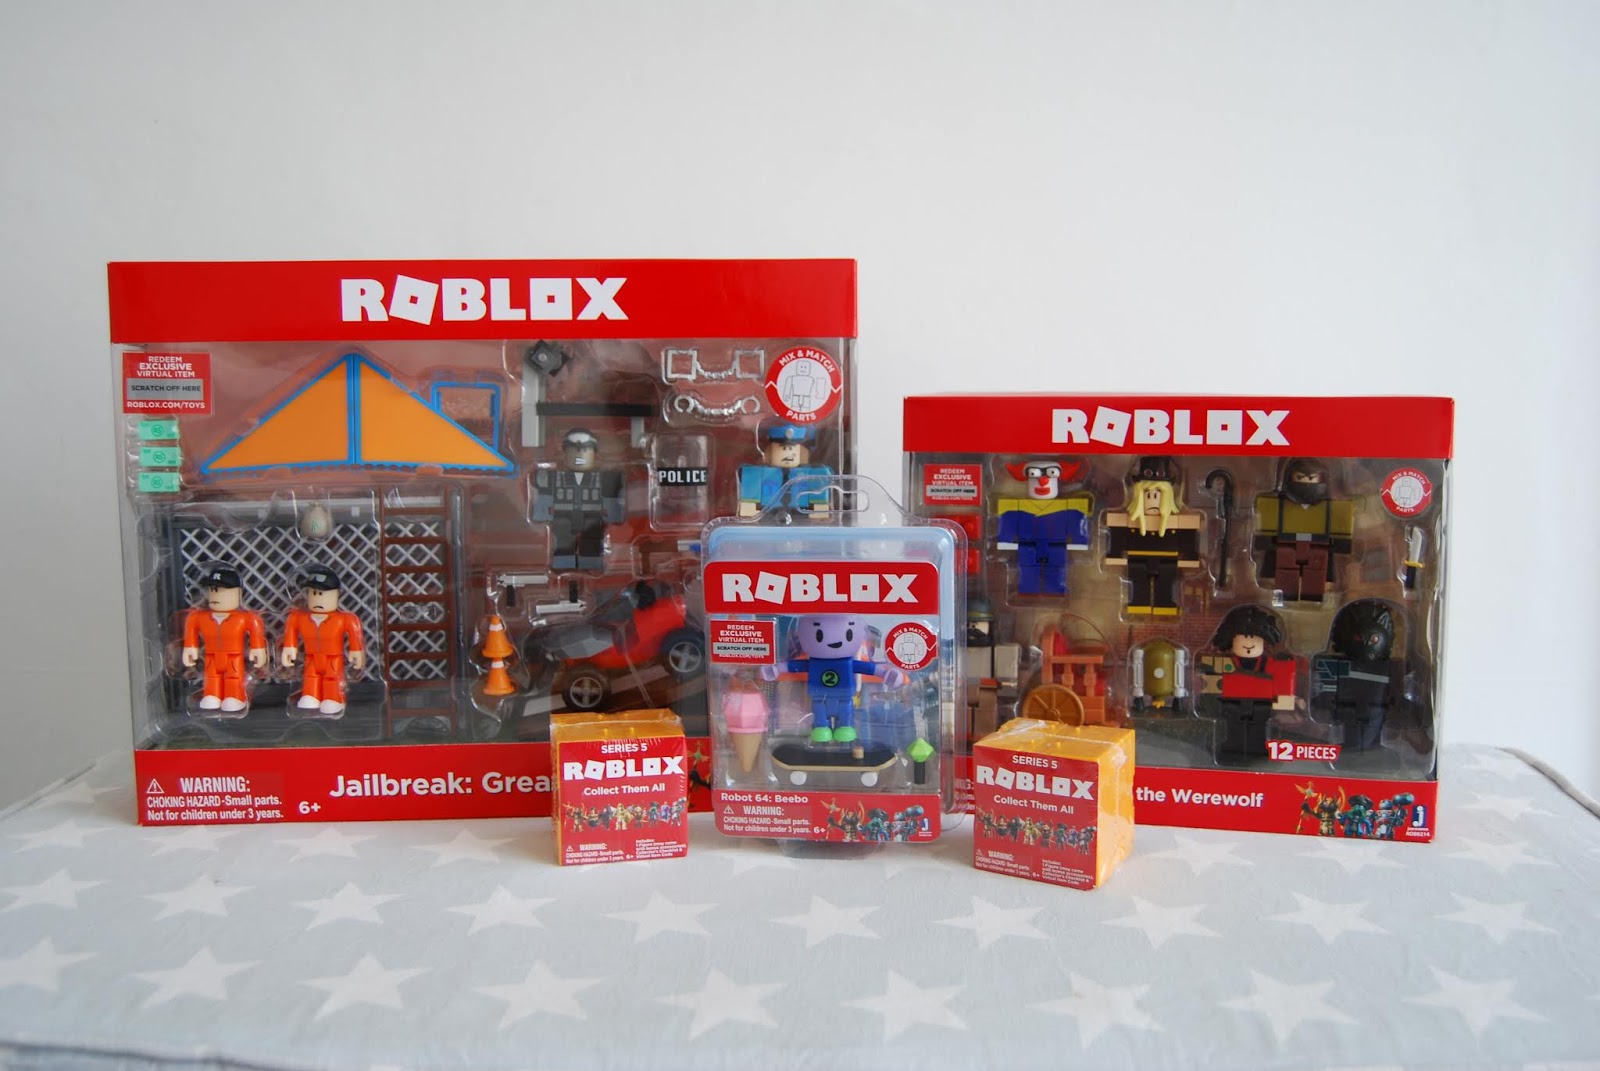 Chic Geek Diary Roblox Series 5 Toys Review Giveaway - playset roblox toys jailbreak